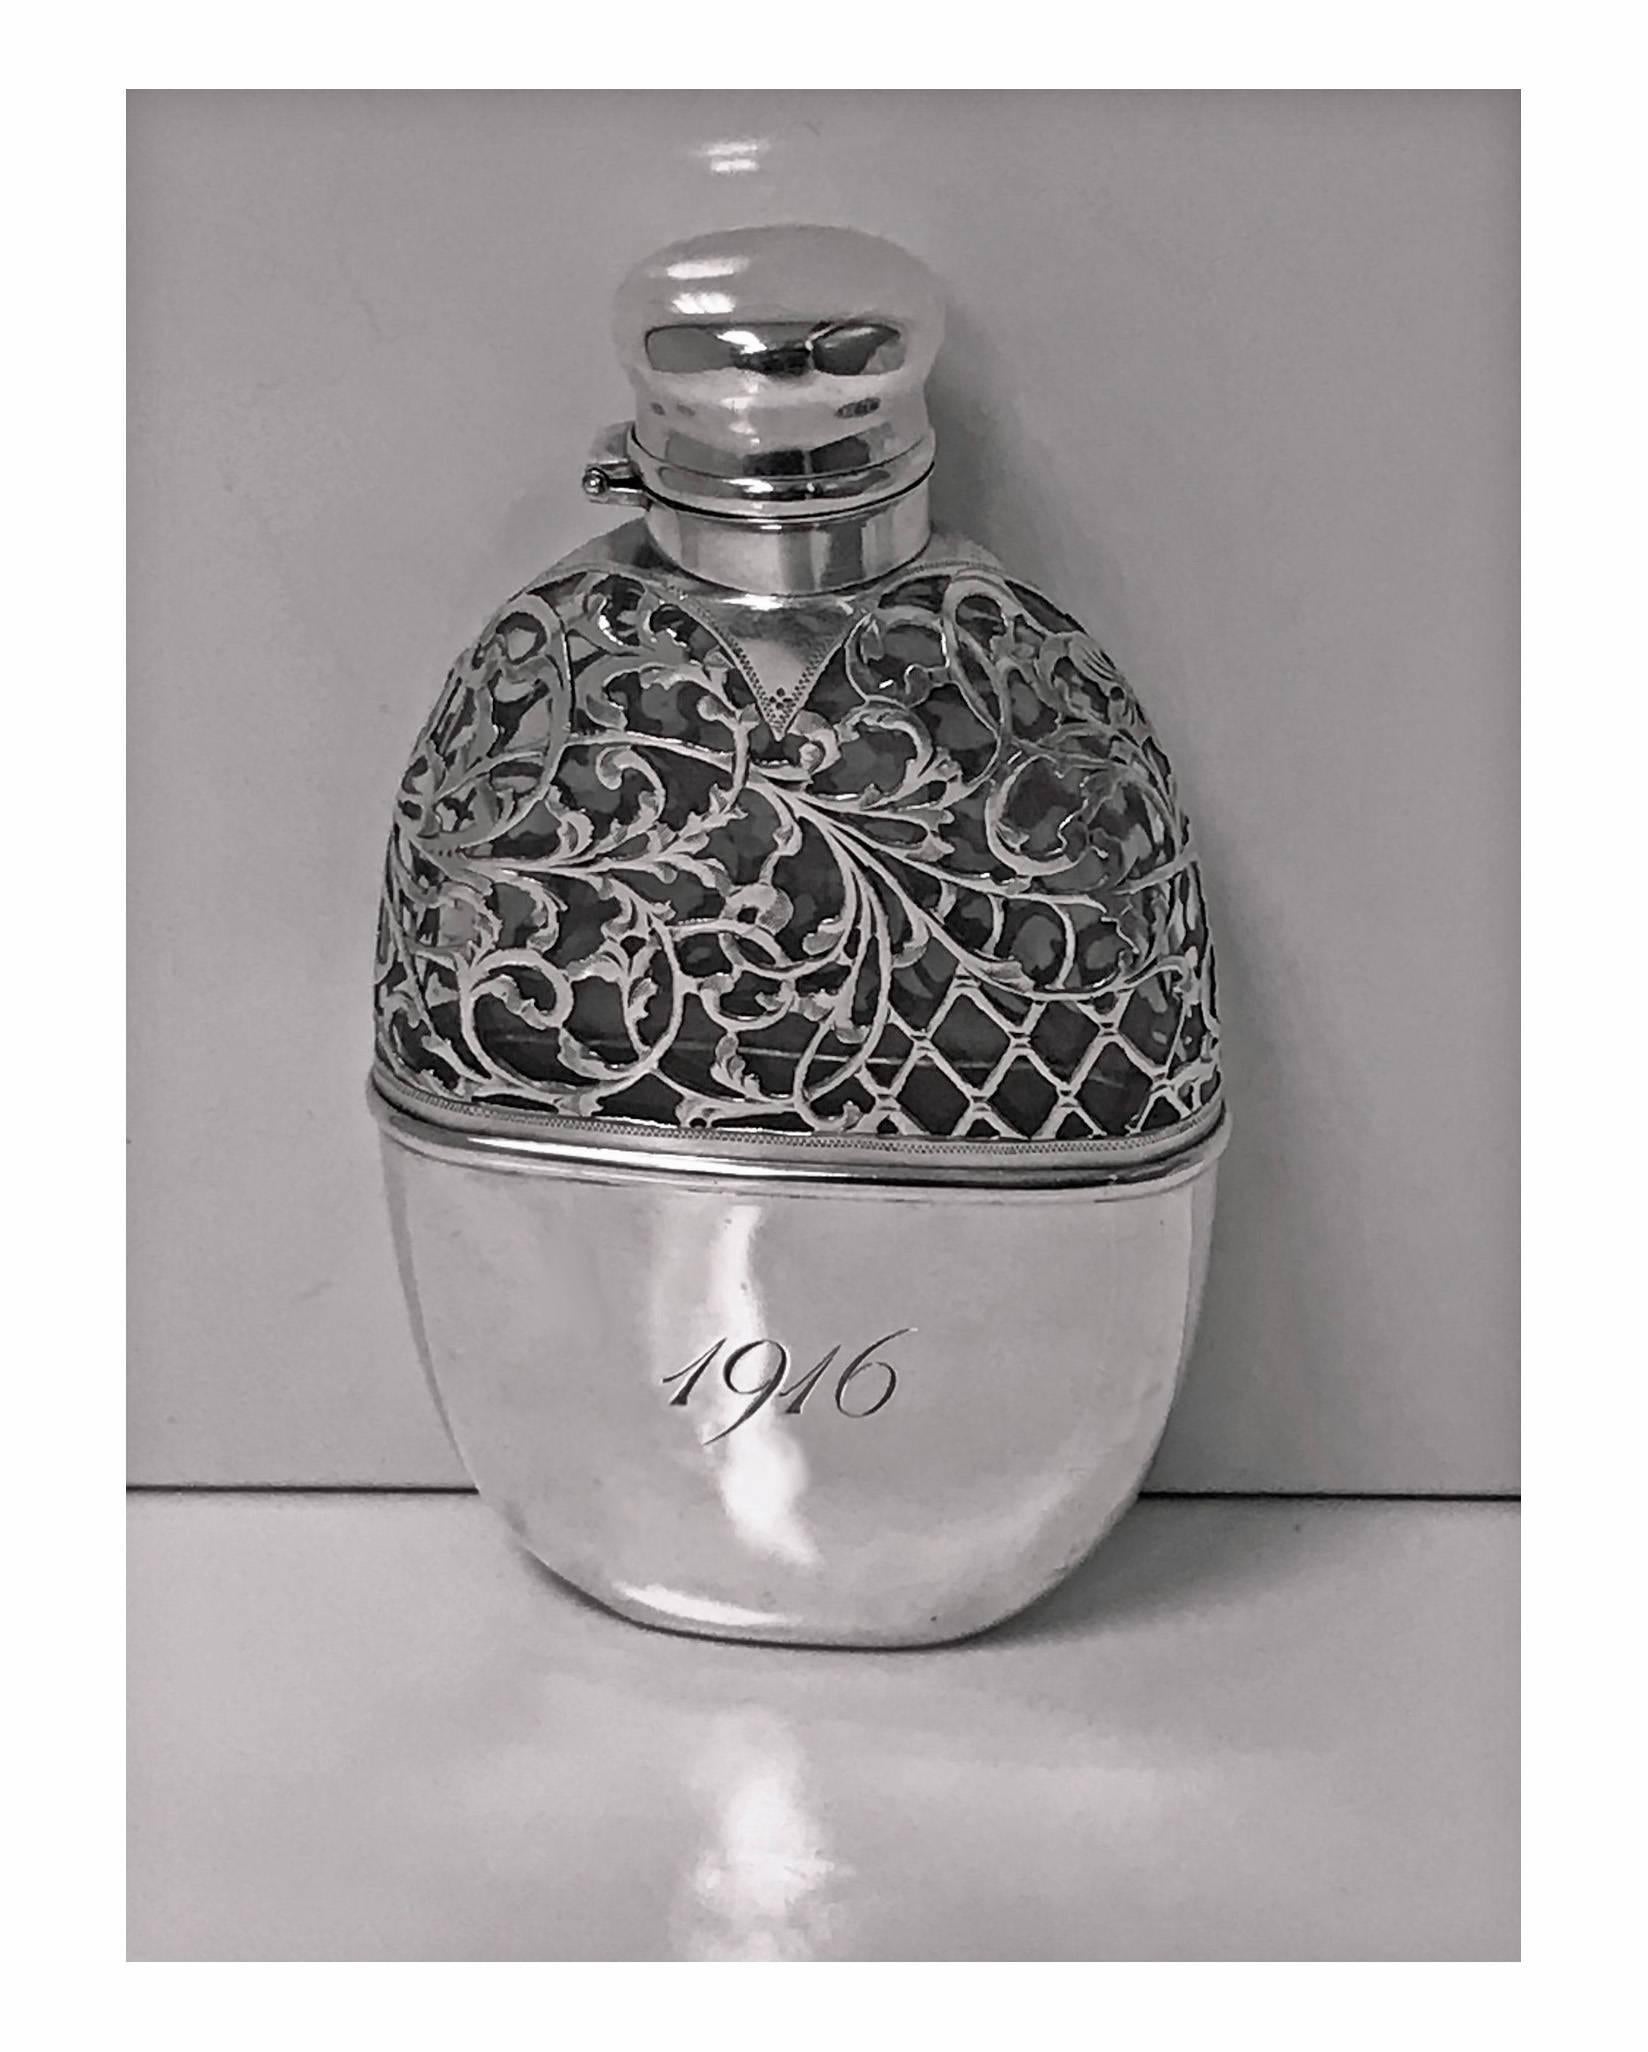 Sterling overlay hip flask, American, circa 1900. The flask with detachable cup, engraved 1916 on one side and intertwining initials, possibly CEH on the other side. The top with thick sterling overlay on clear glass bottle, bayonet hinged cover,